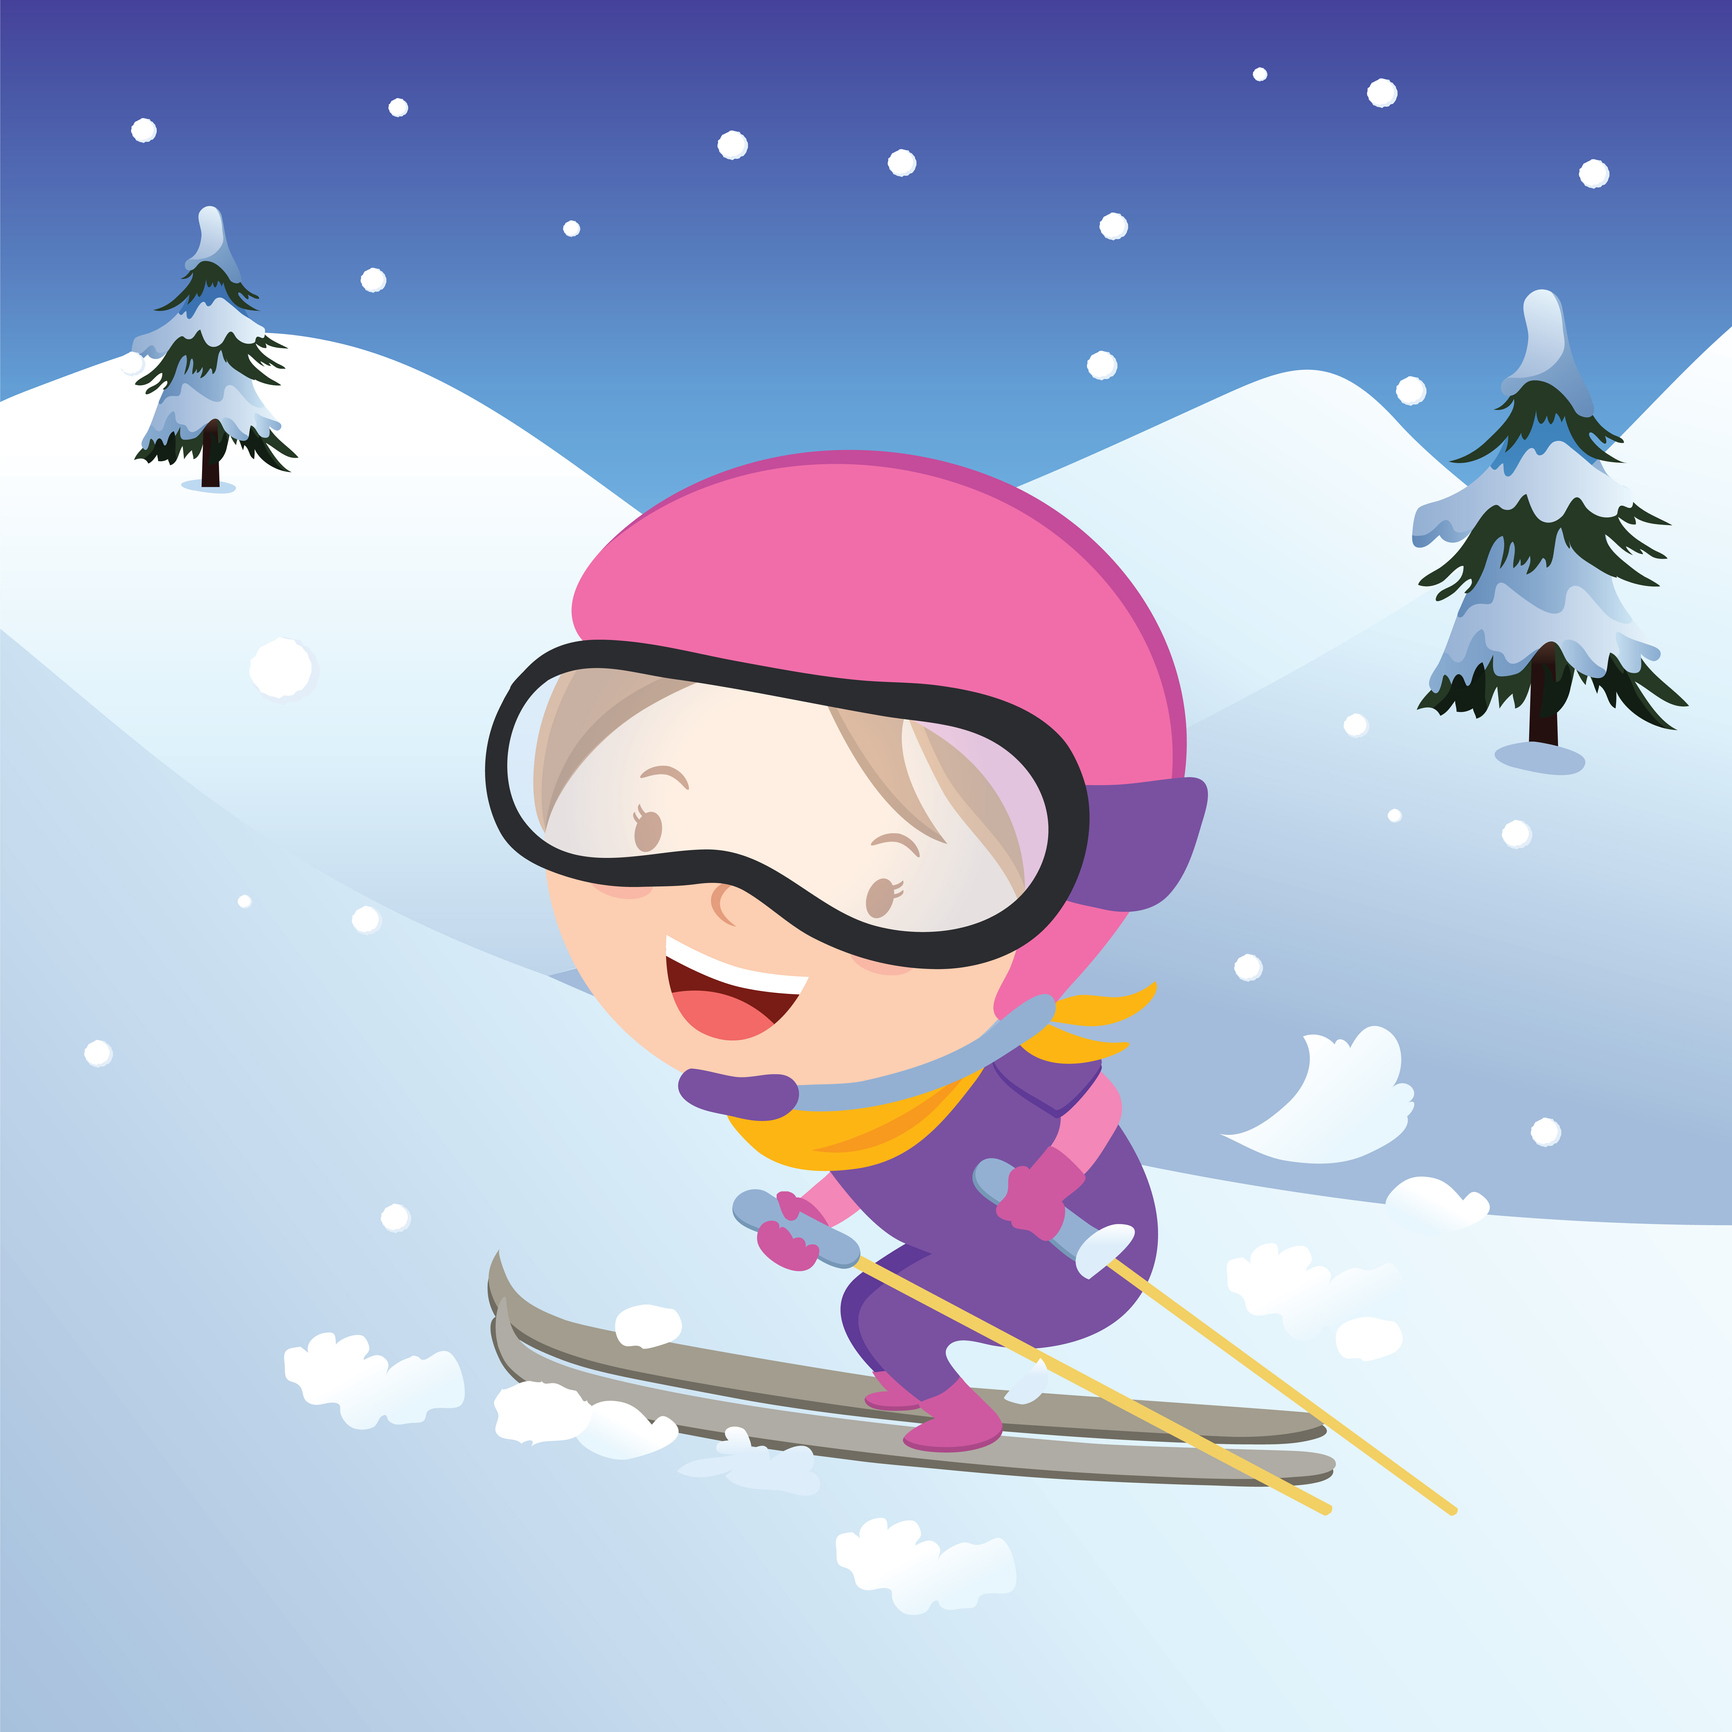 Five tips to lower the odds of children getting a concussion skiing